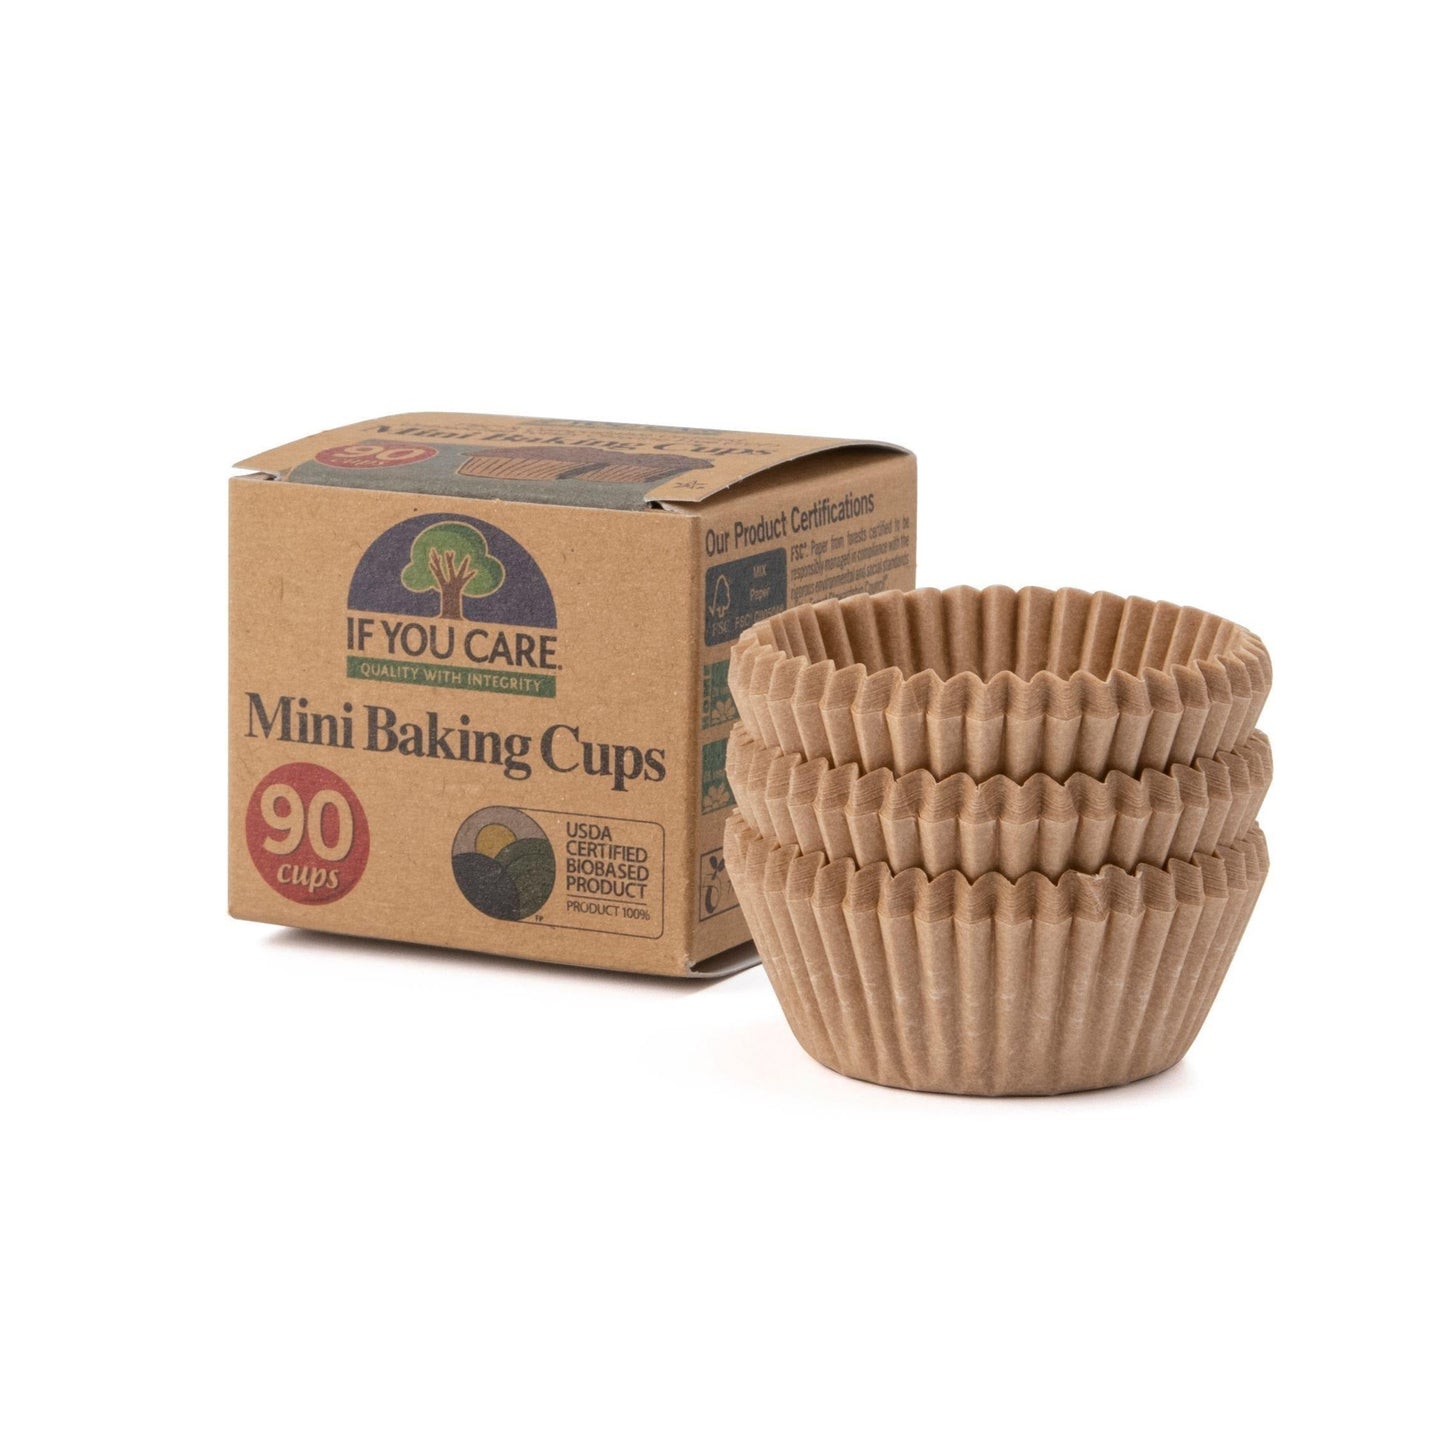 Mini Baking Cups (90) - Wildsprout